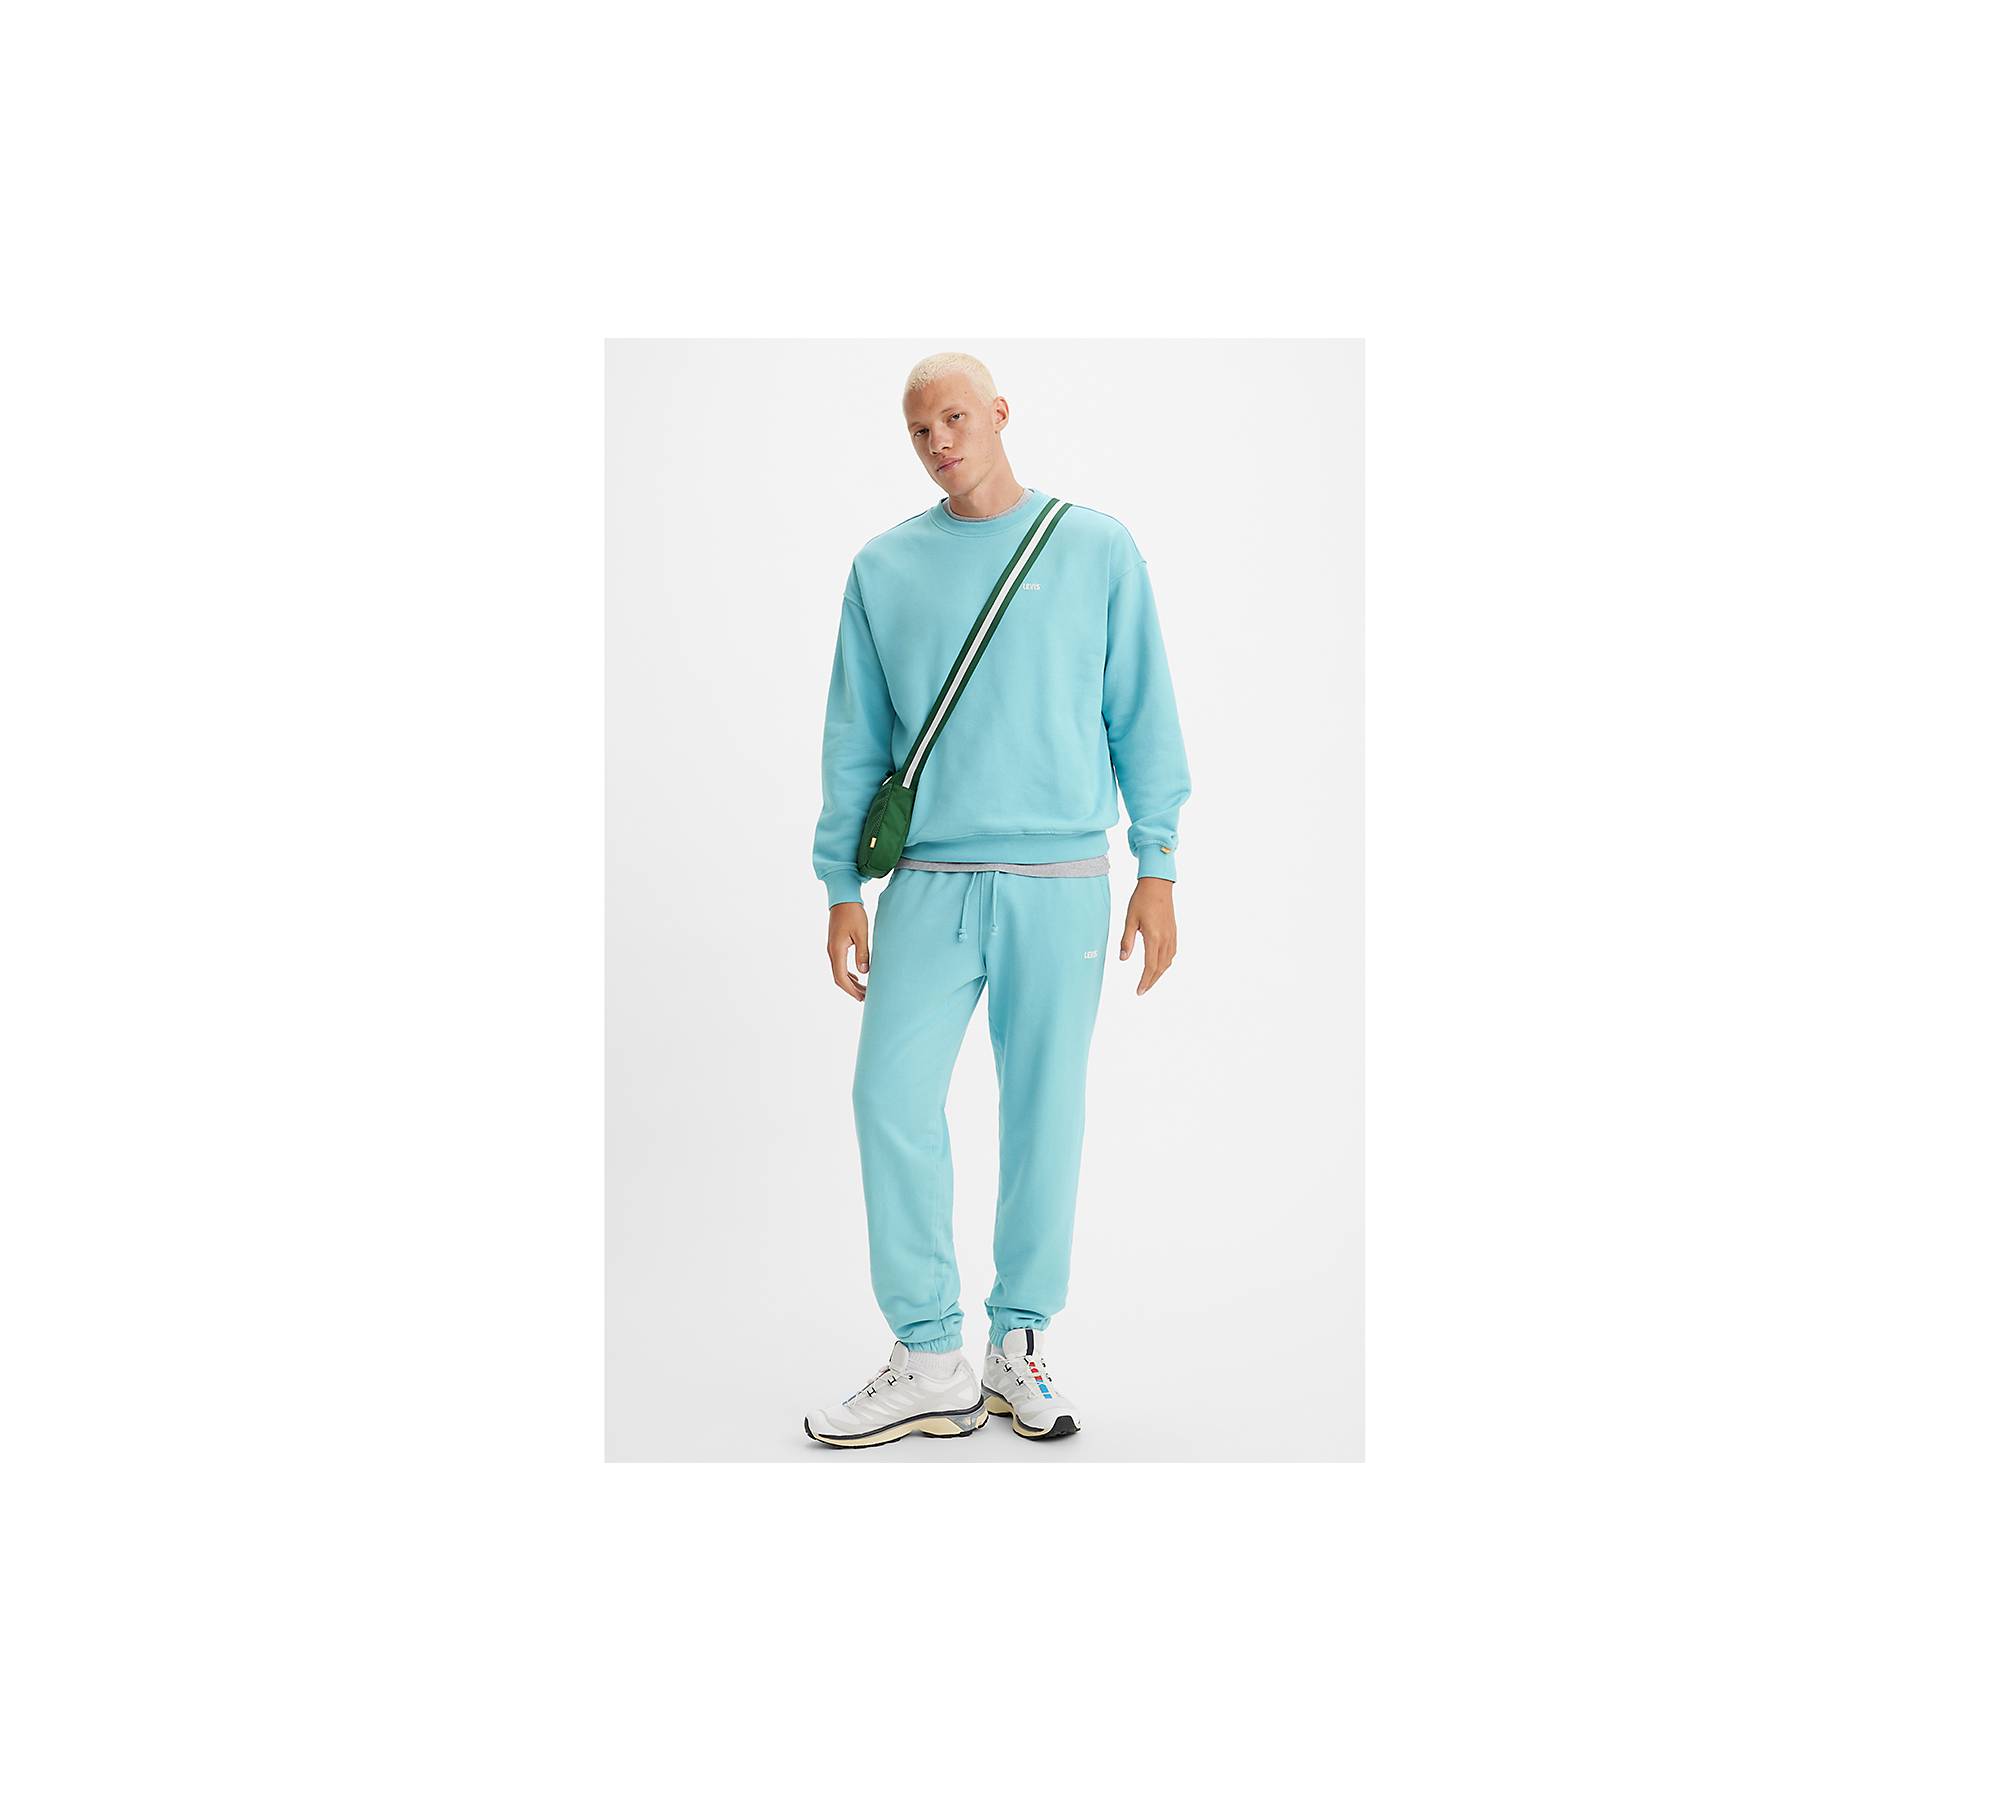 100 Sweats ideas in 2023  mens outfits, tracksuit, track suit men